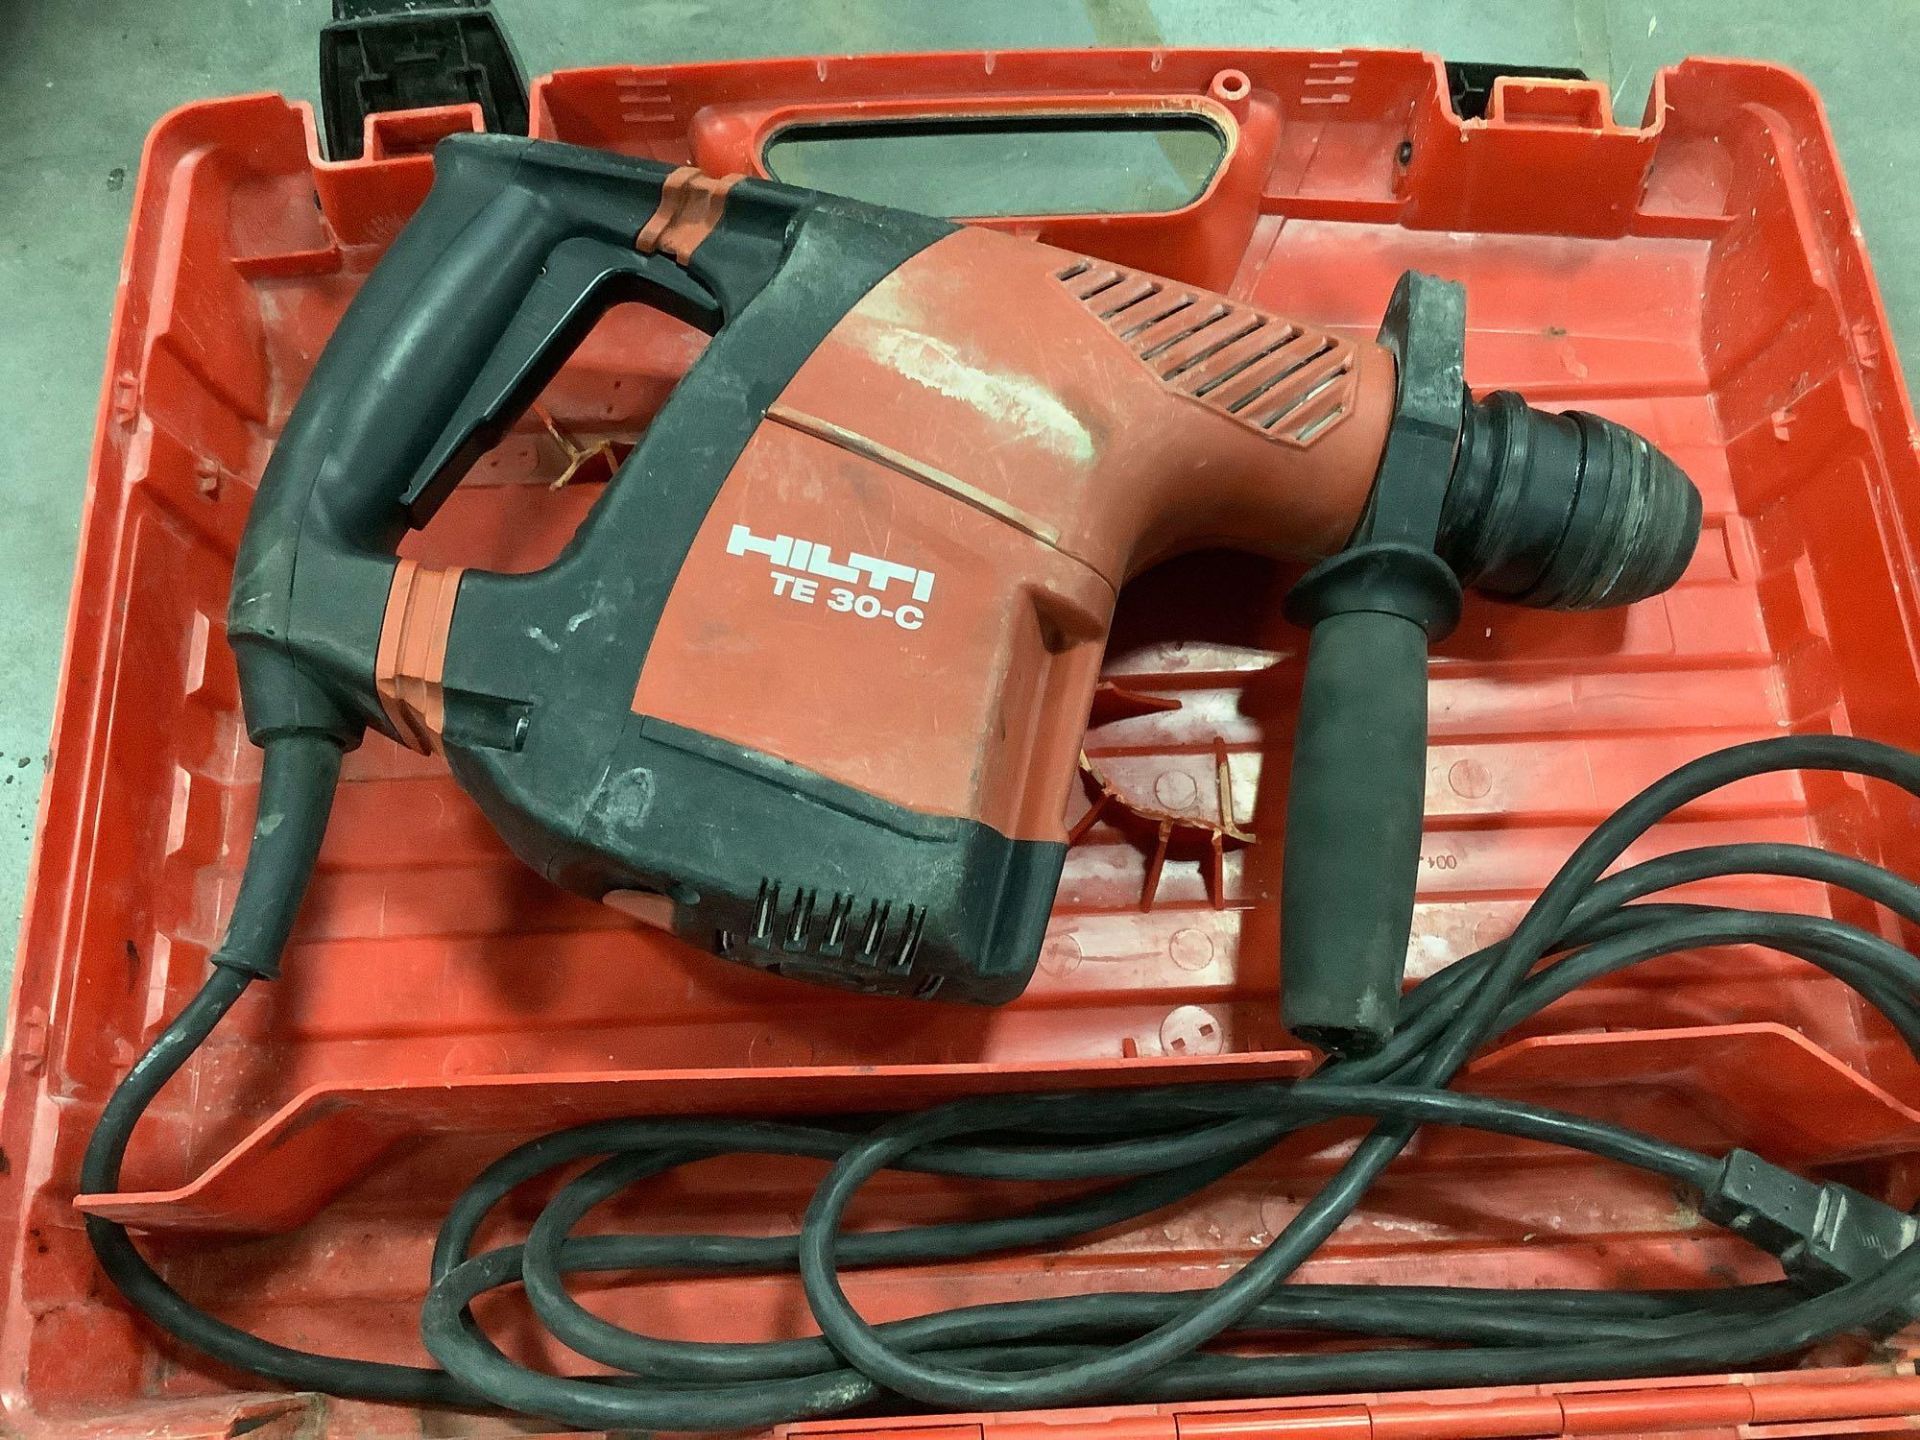 HILTI TE 30-C -AVR ROTARY HAMMER WITH CARRYING CASE - Image 2 of 6